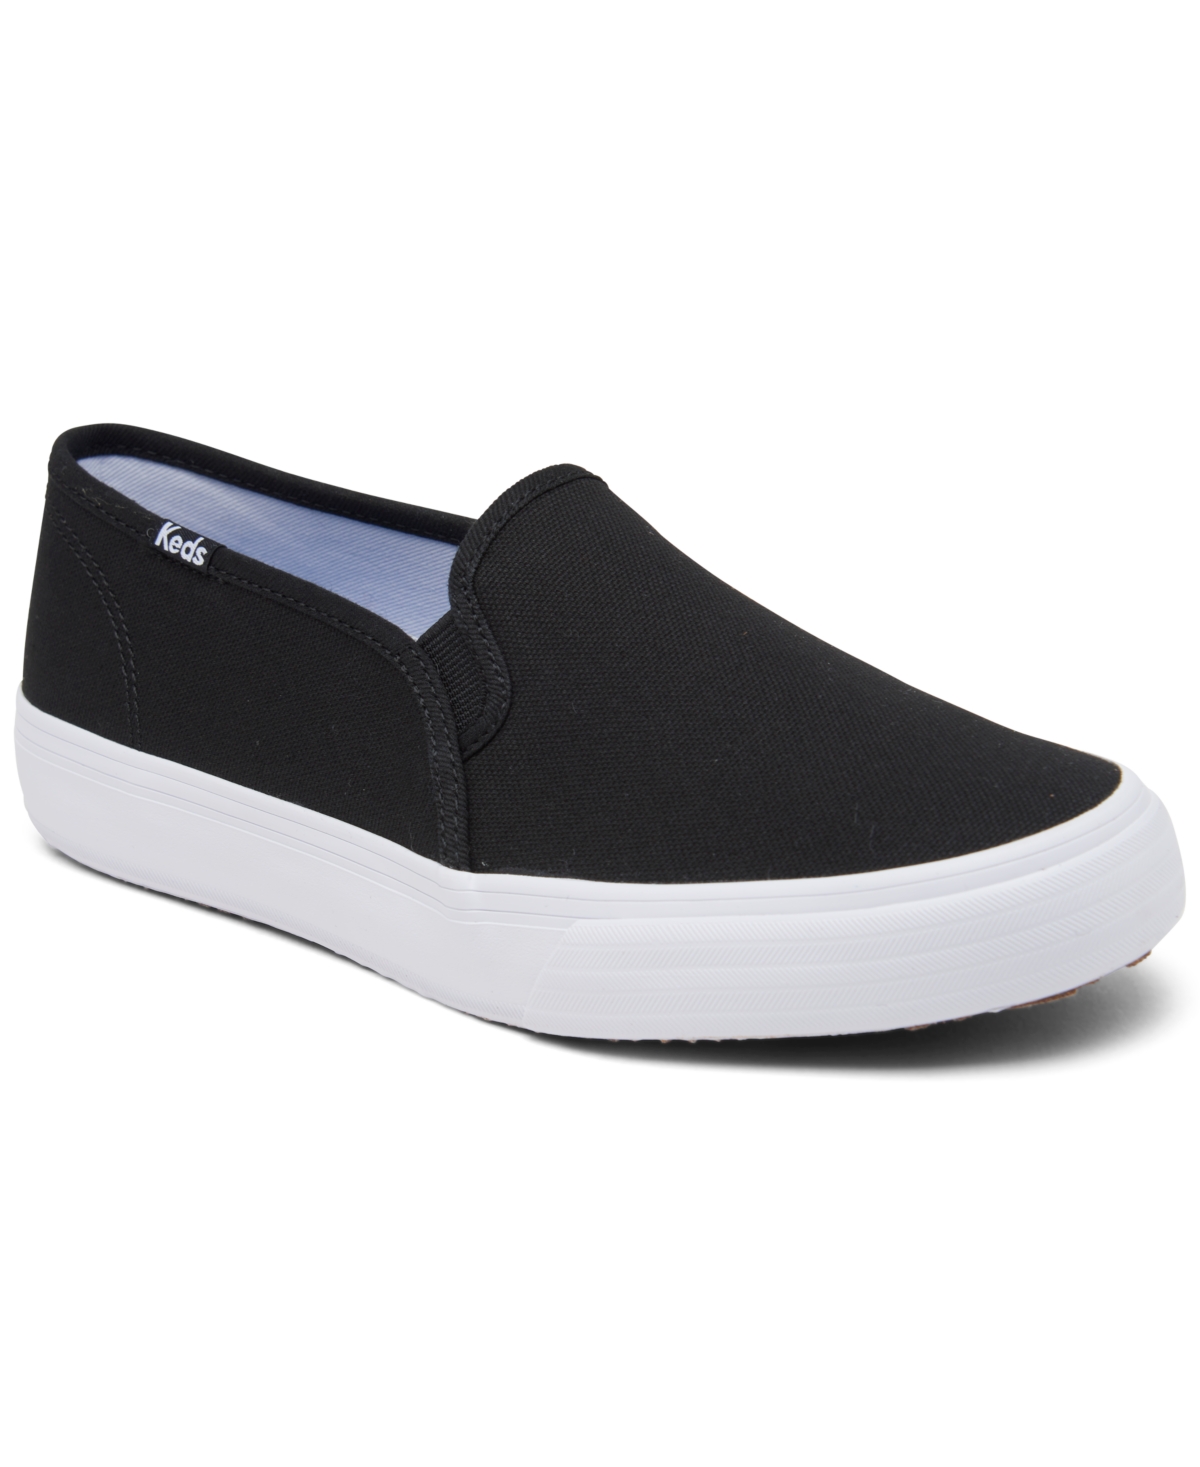 Keds Women's Double Decker Canvas Slip-On Casual Sneakers from Finish Line